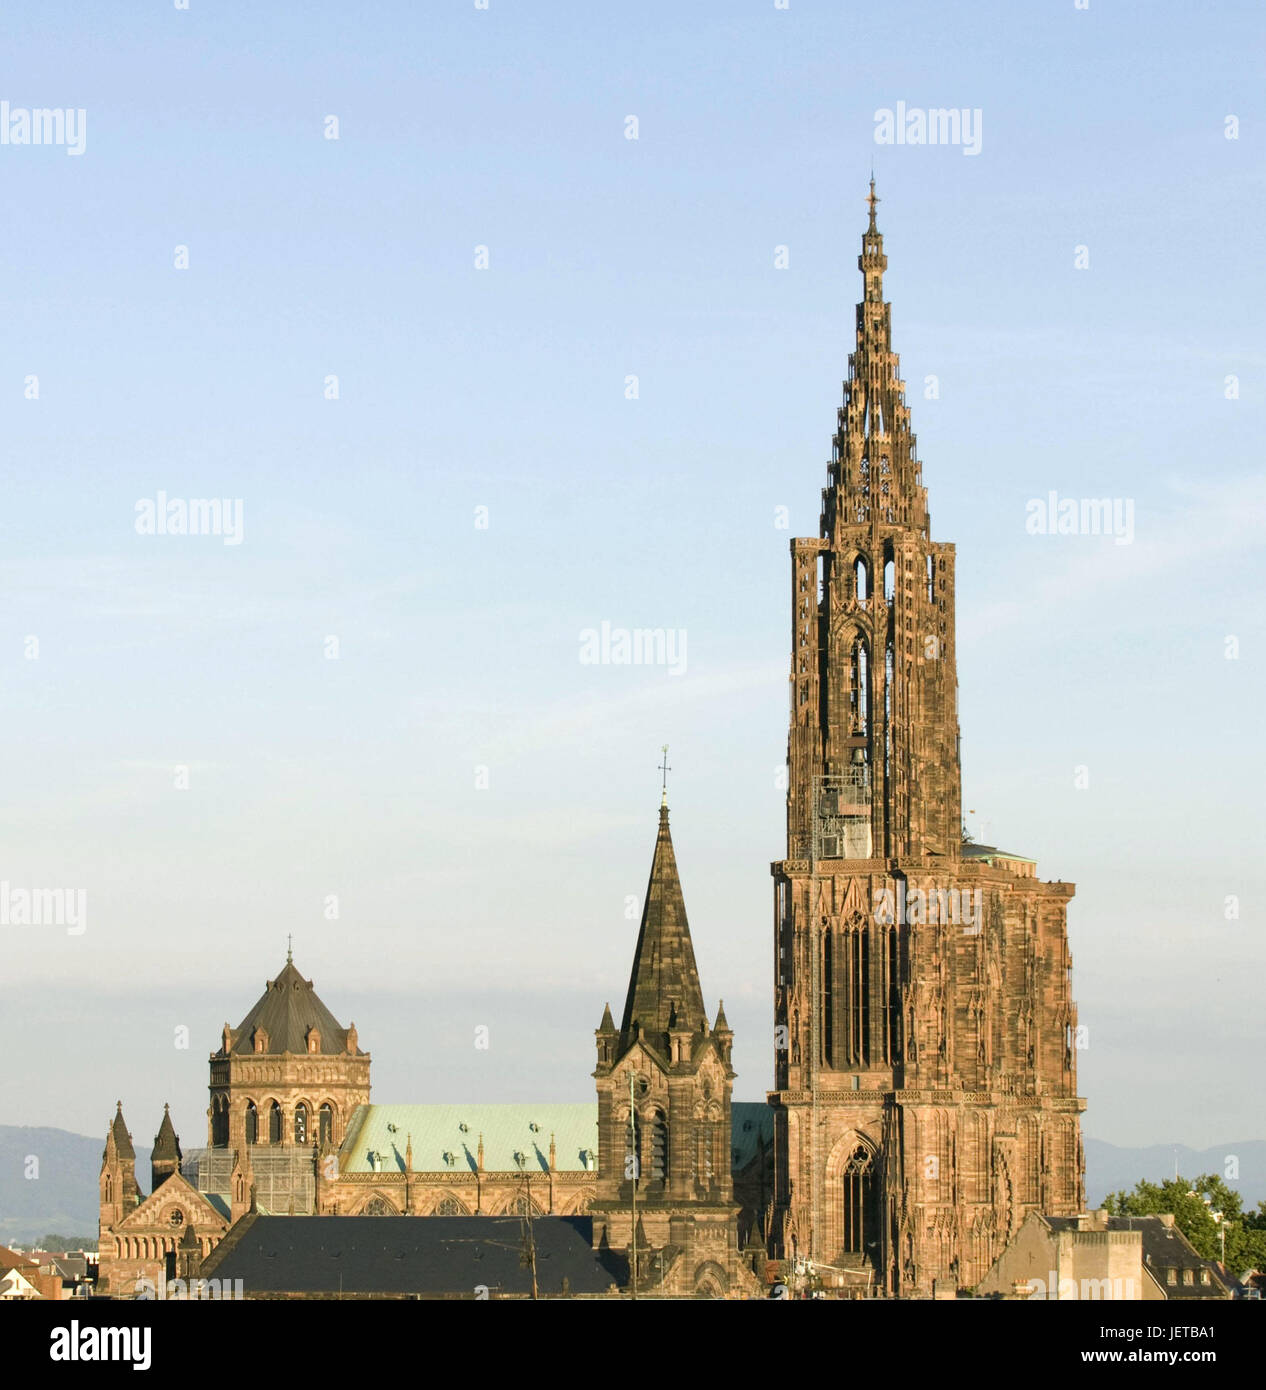 France, Alsace, Strasbourg, cathedral, Europe, destination, place of interest, landmark, building, structure, architecture, church, sacred construction, church, steeple, sky, faith, religion, Christianity, Stock Photo